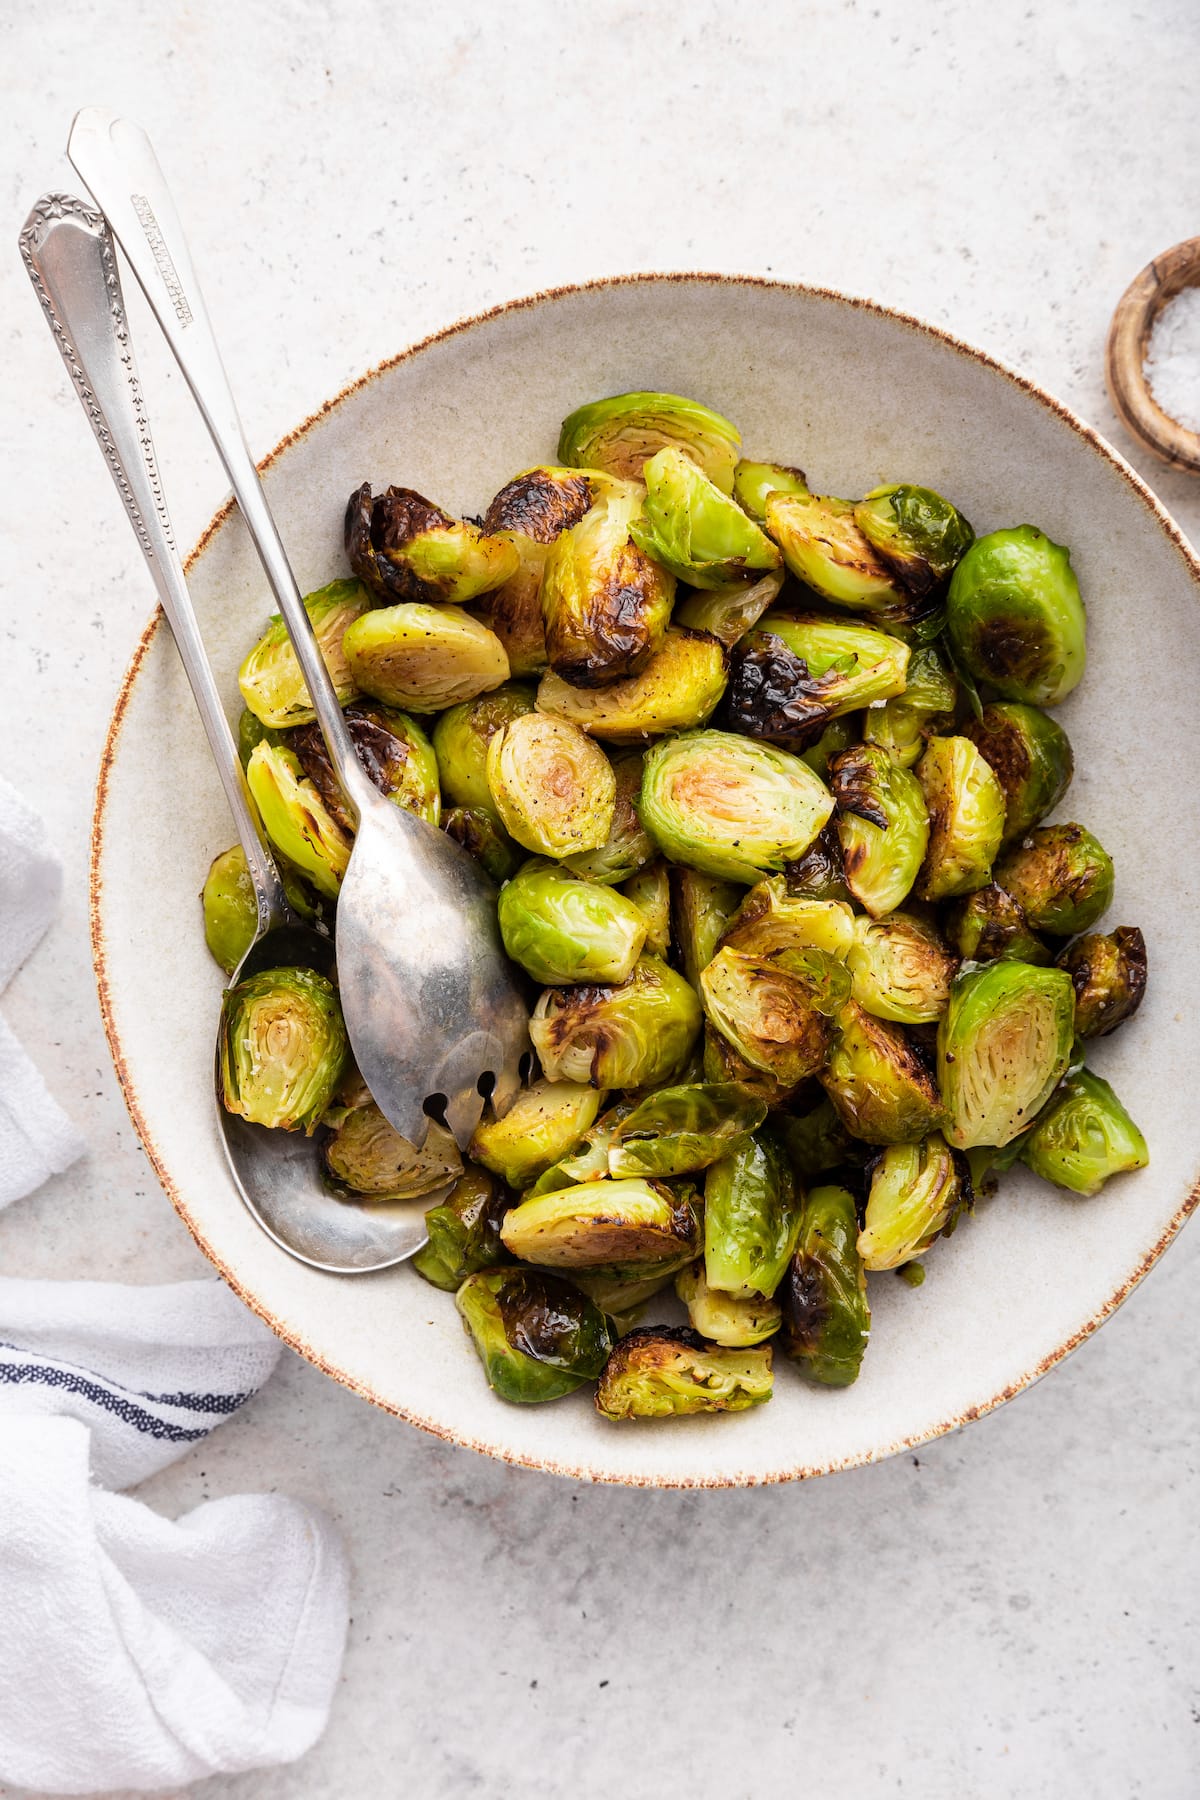 Roasted brussels sprouts in a large bowl with two metal serving spoons.